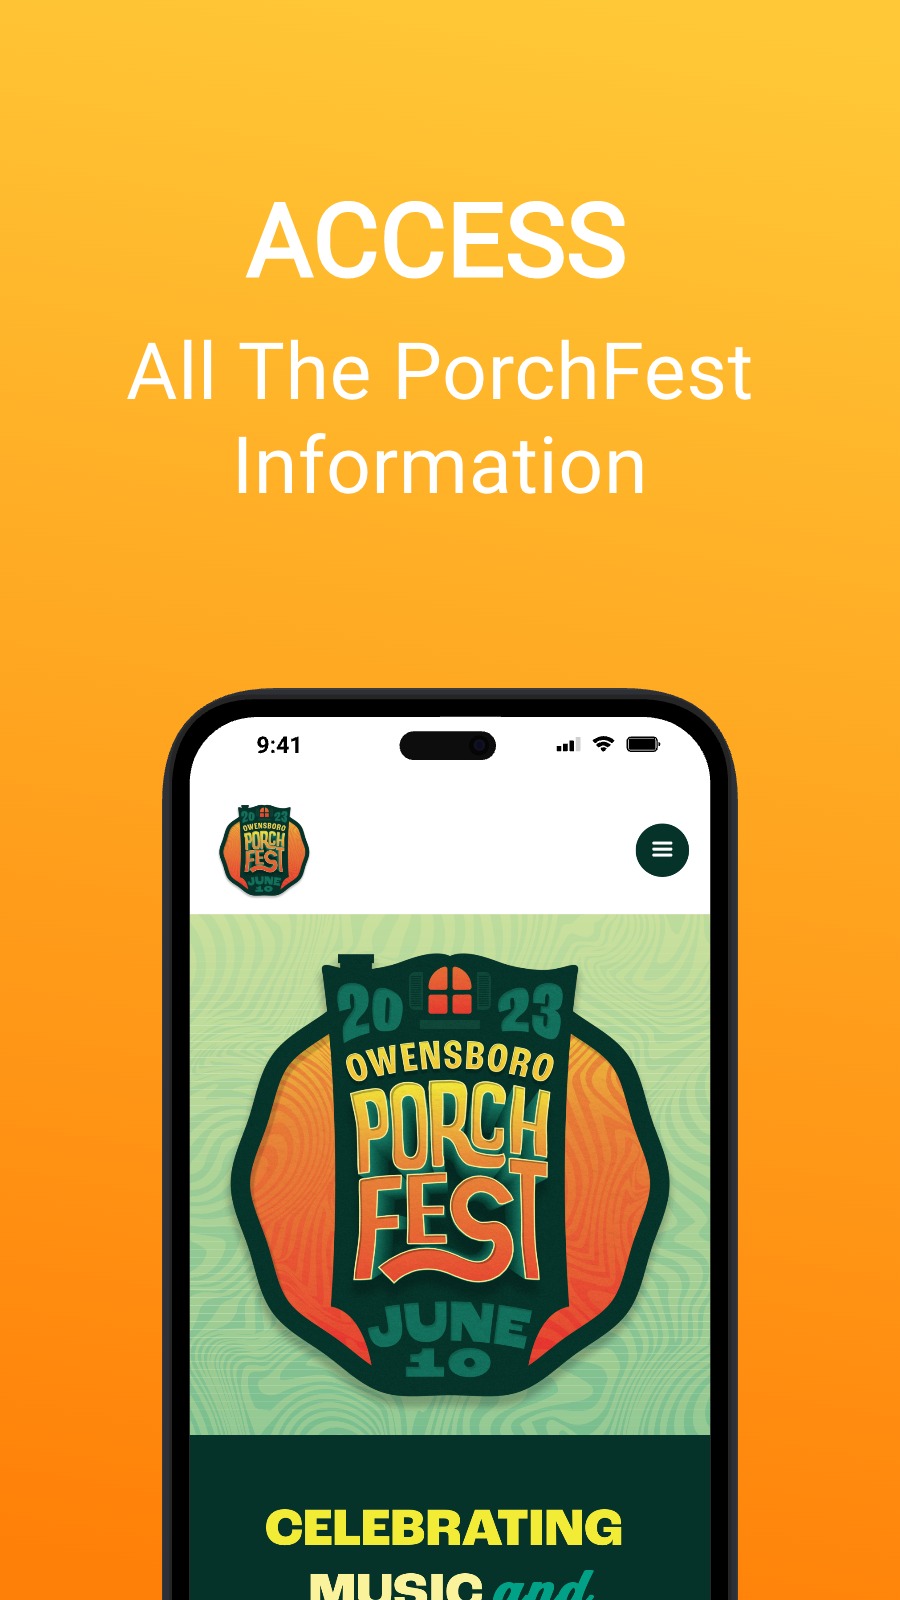 ACCESS - All The PorchFest Information